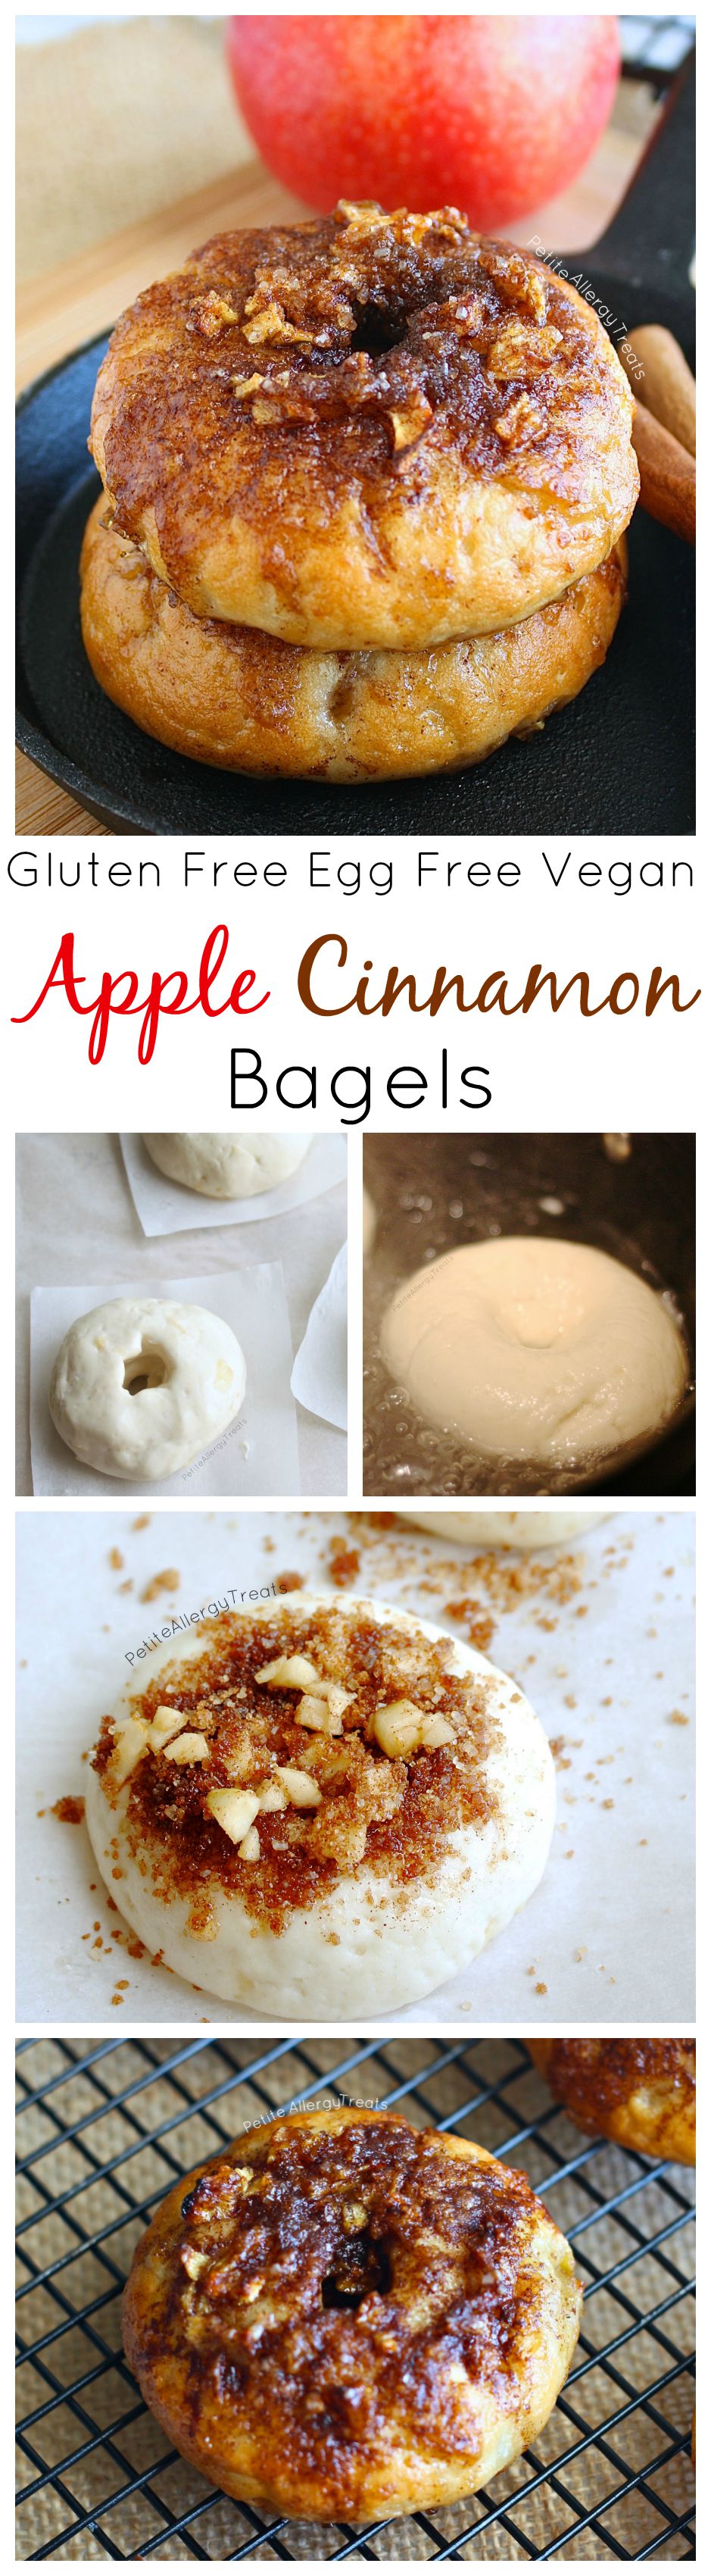 Gluten Free Cinnamon Apple Bagels (egg free vegan) Gluten free bagels never tasted so good! Bite into a bagel with sweet apples with a cinnamon top crunch! 